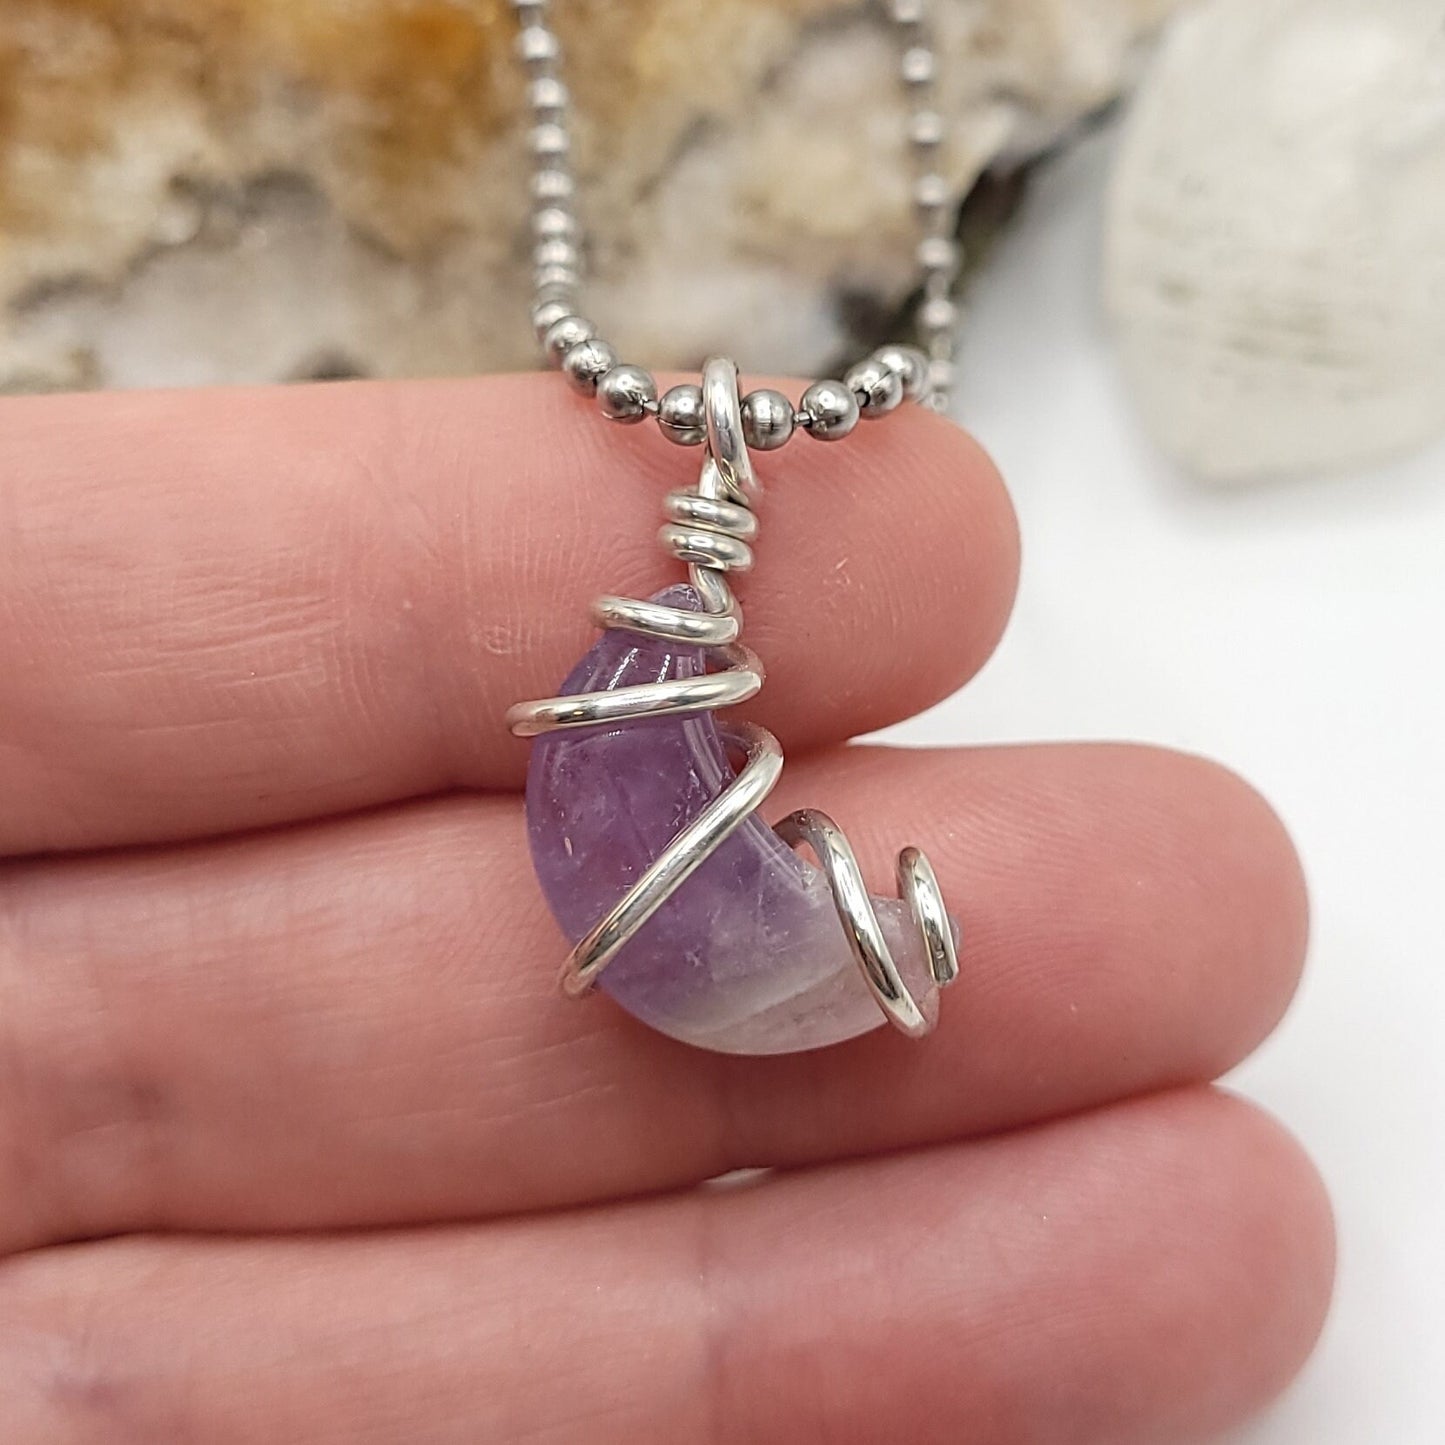 Amethyst Moon Necklace, Silver Wire Wrapped Amethyst Pendant, Crystal Crescent Moon Pendant